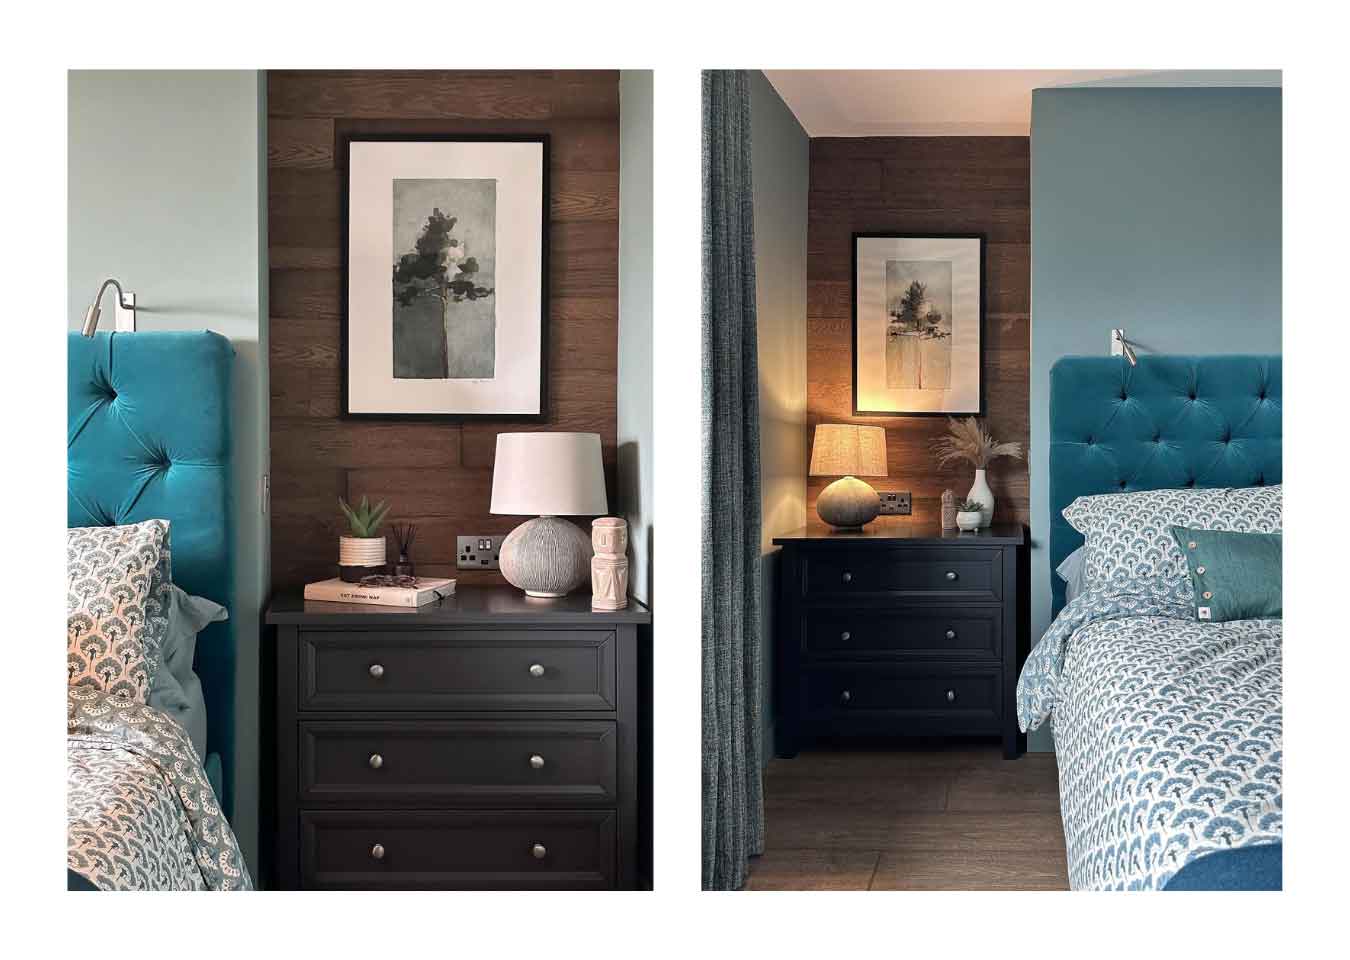 Blue bedroom with dark wood planks on the alcove walls, dark grey drawers, white lamps, house plants and monochrome wall art.